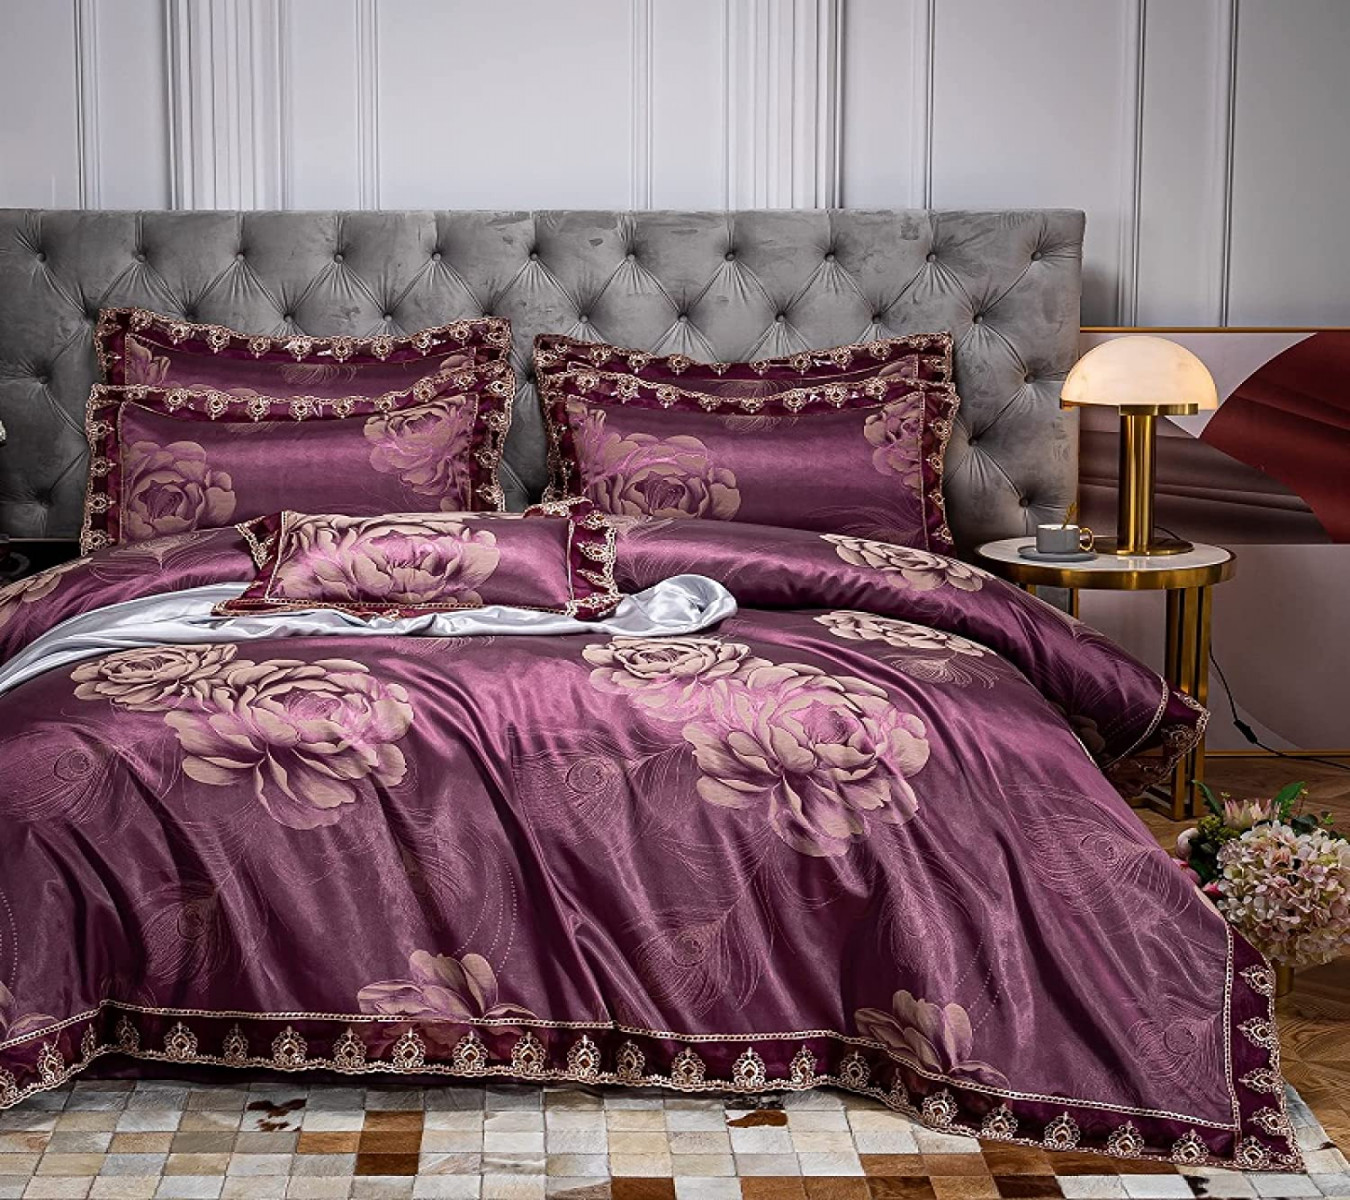 Luxury Bed Sets